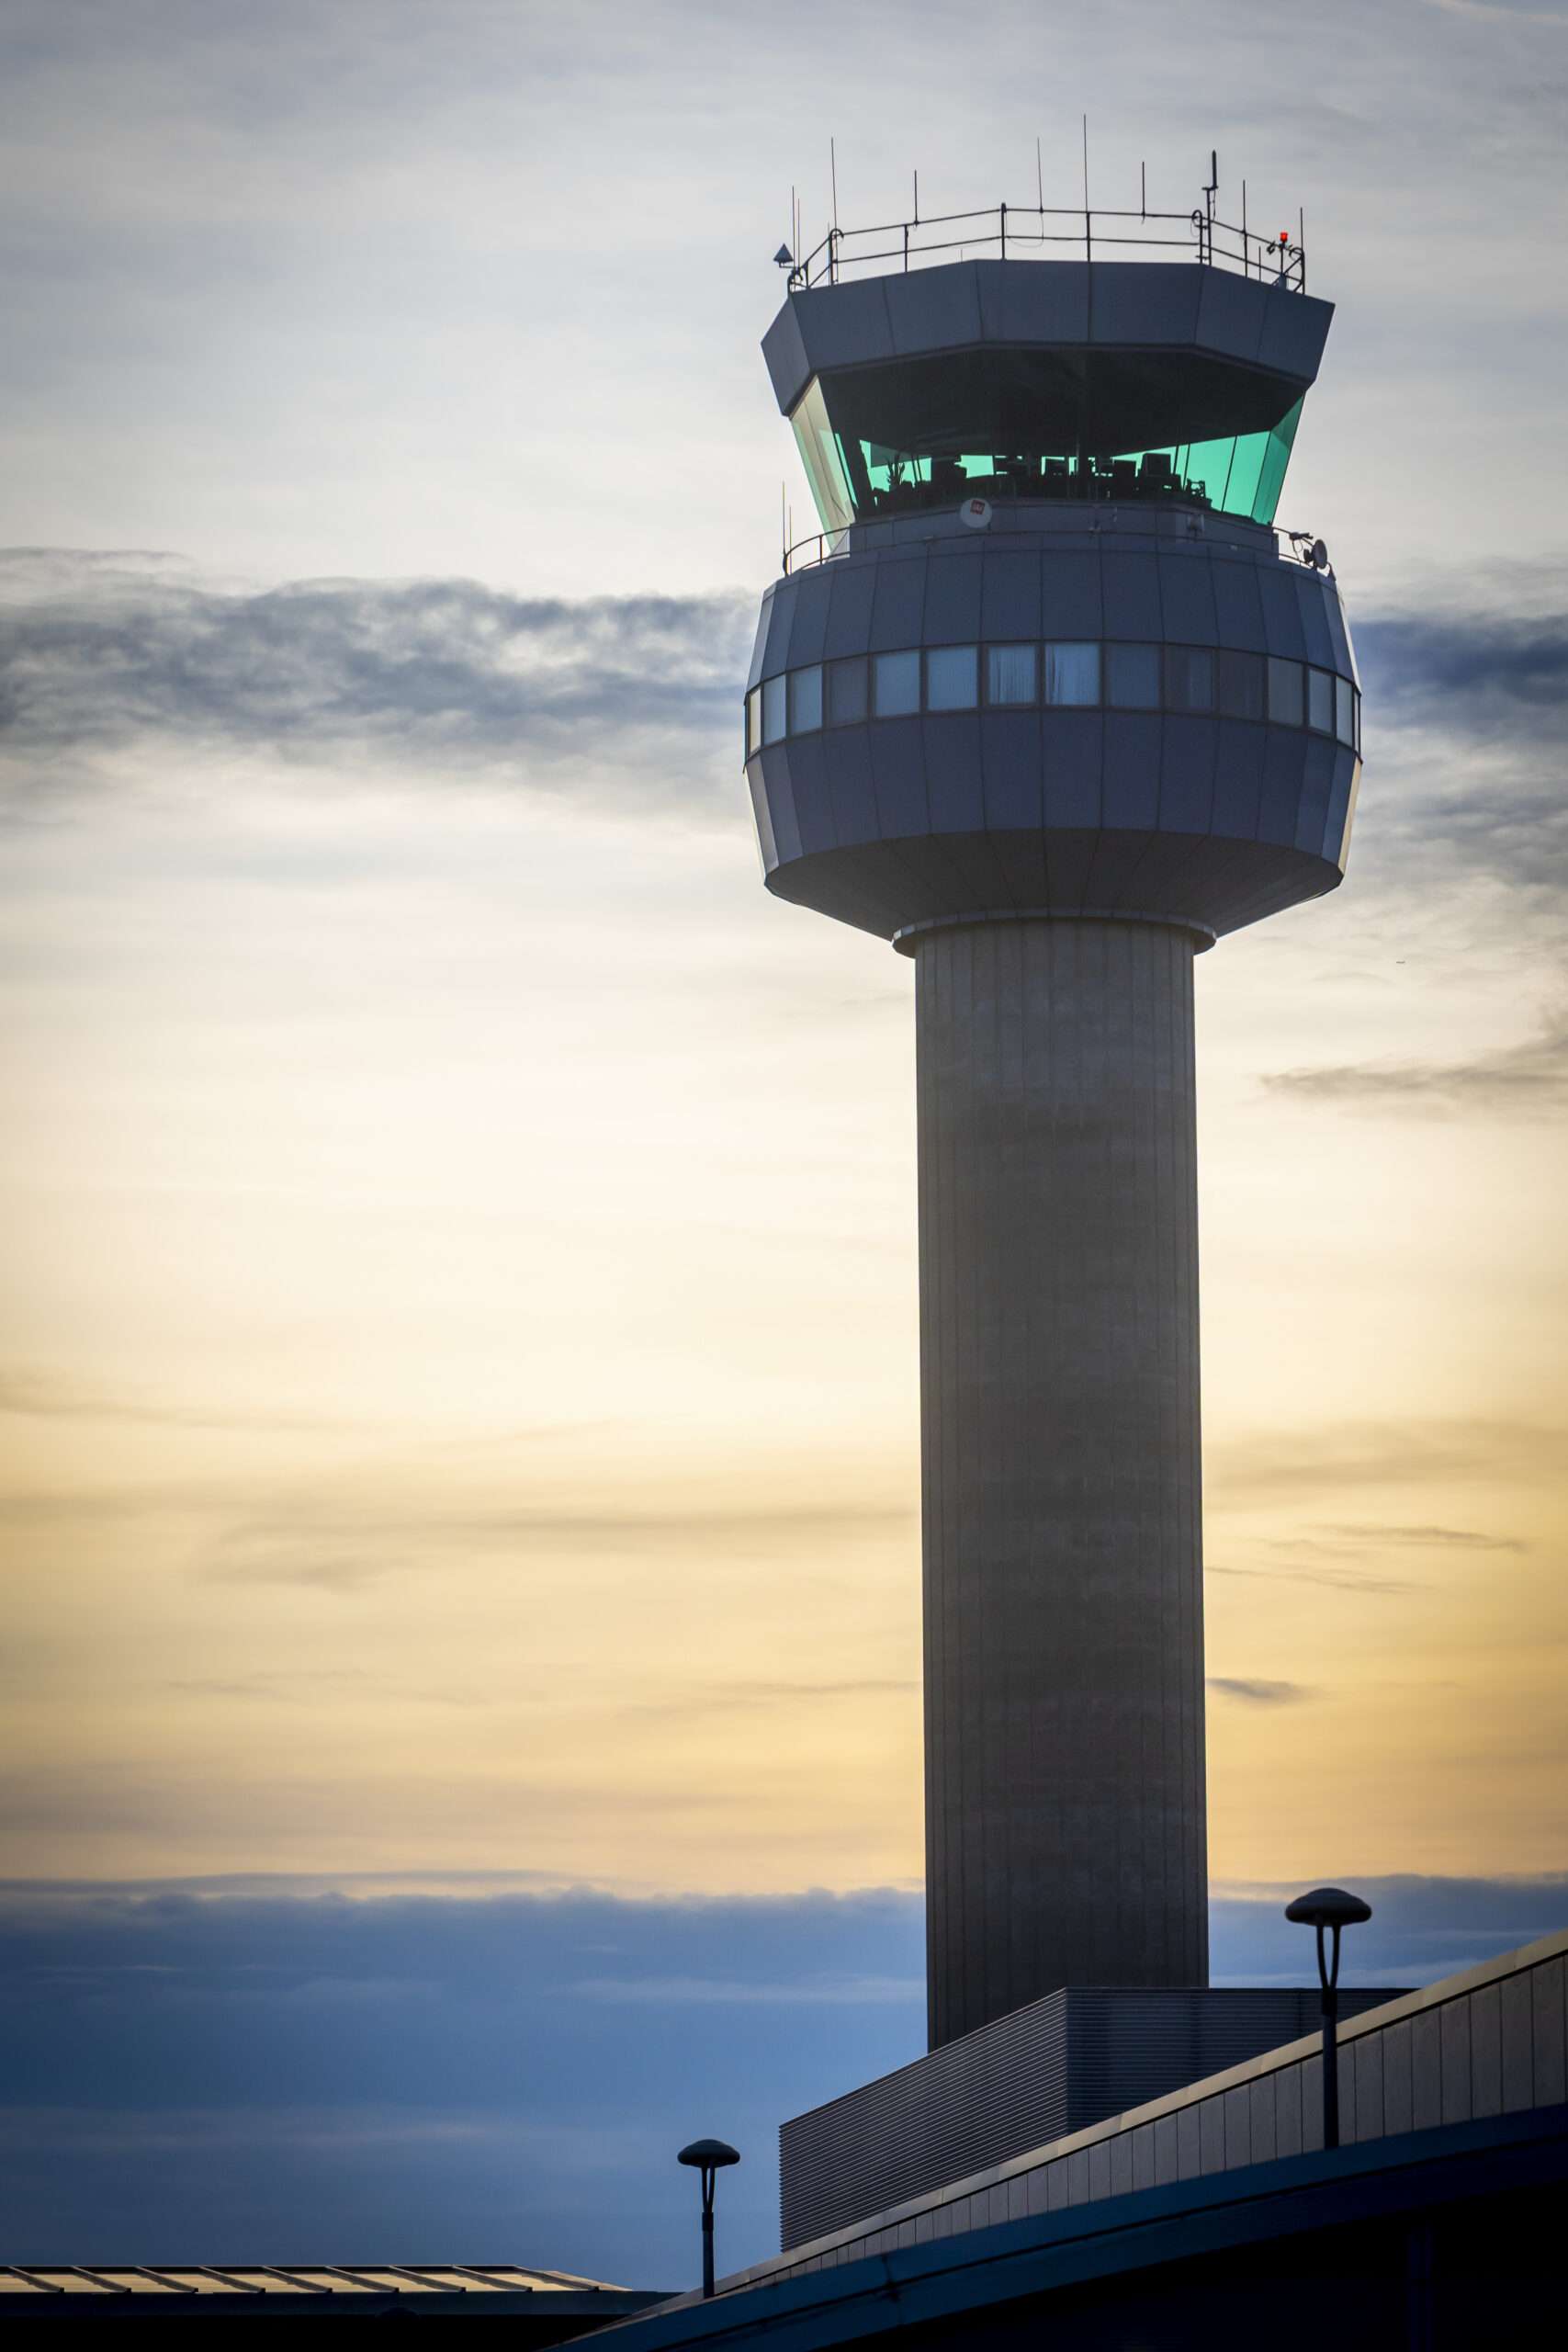 East Midlands: 25th ATC Tower Anniversary